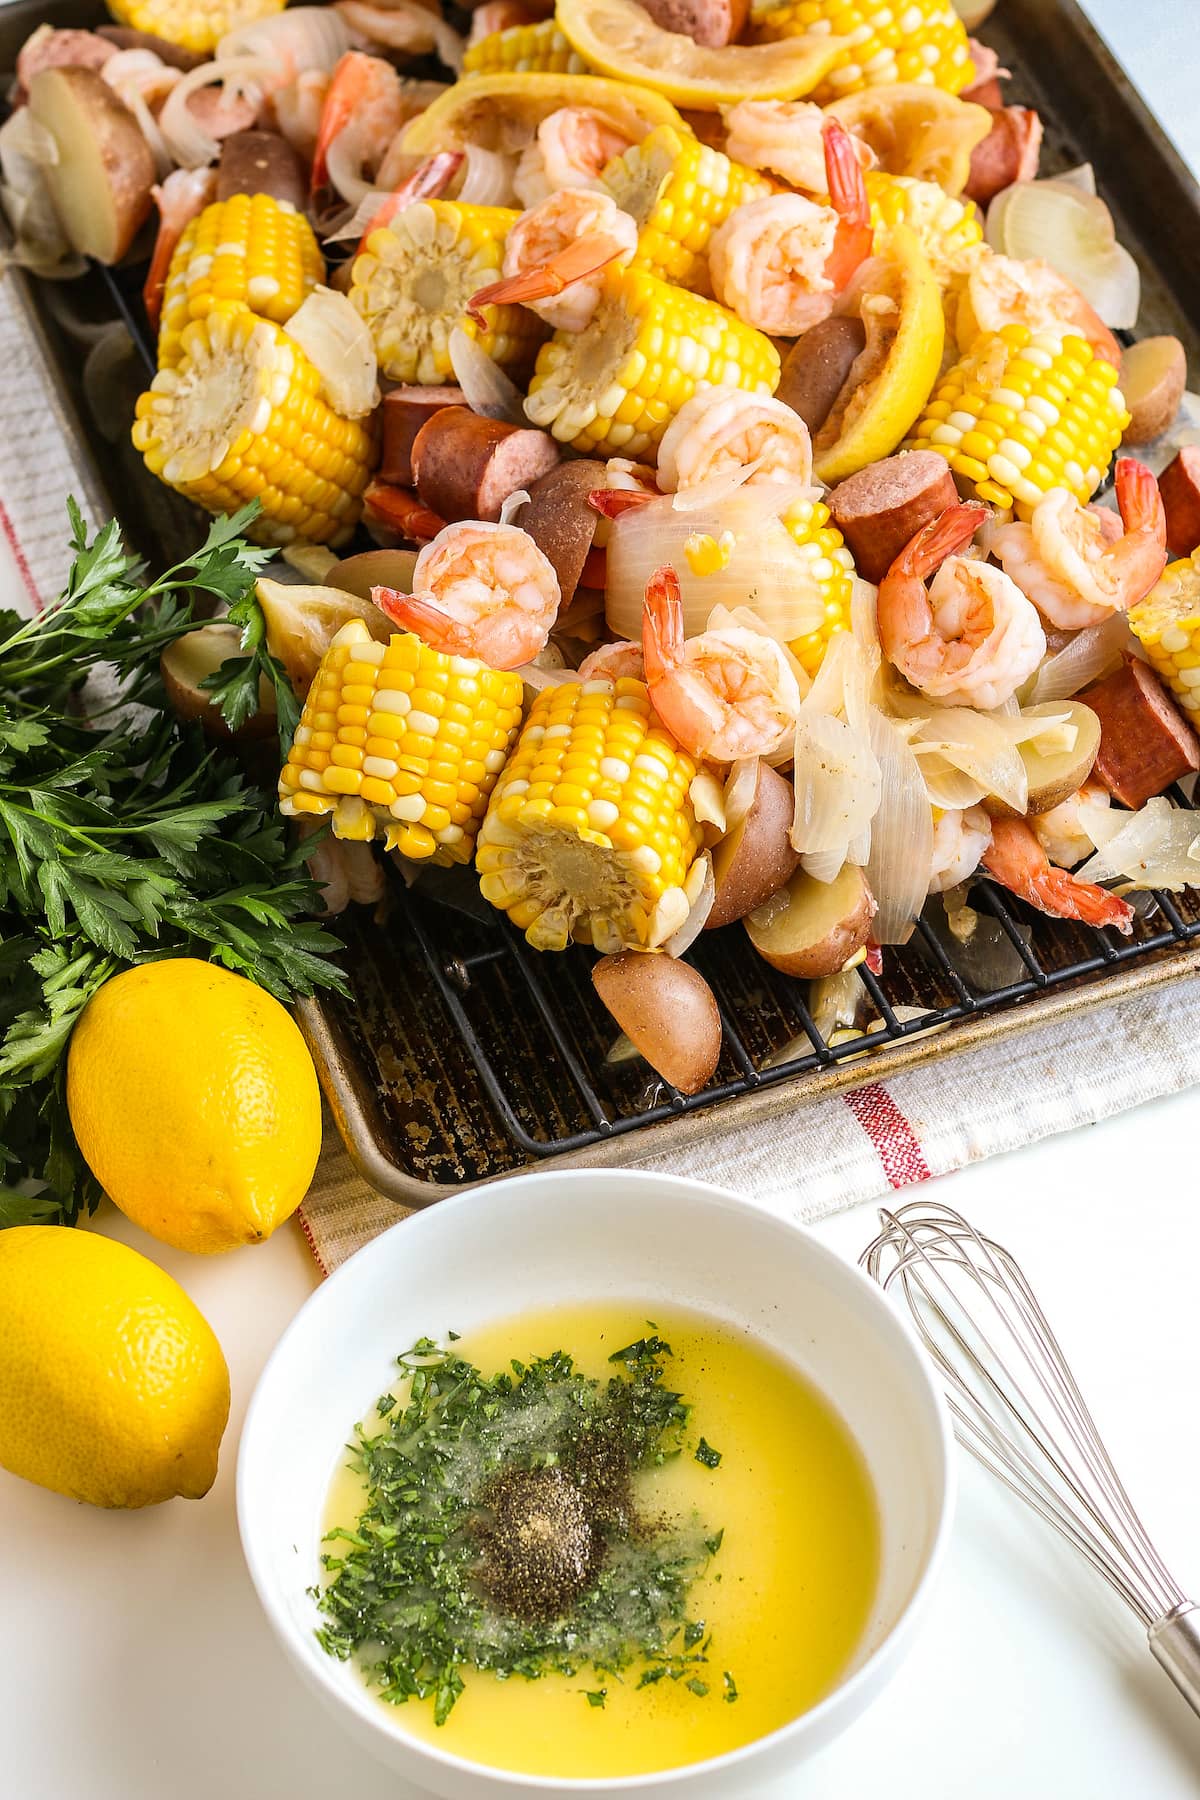 shrimp boil with shrimp, sausage, corn on the cob, lemons, and potatoes and a side of melted butter with herbs